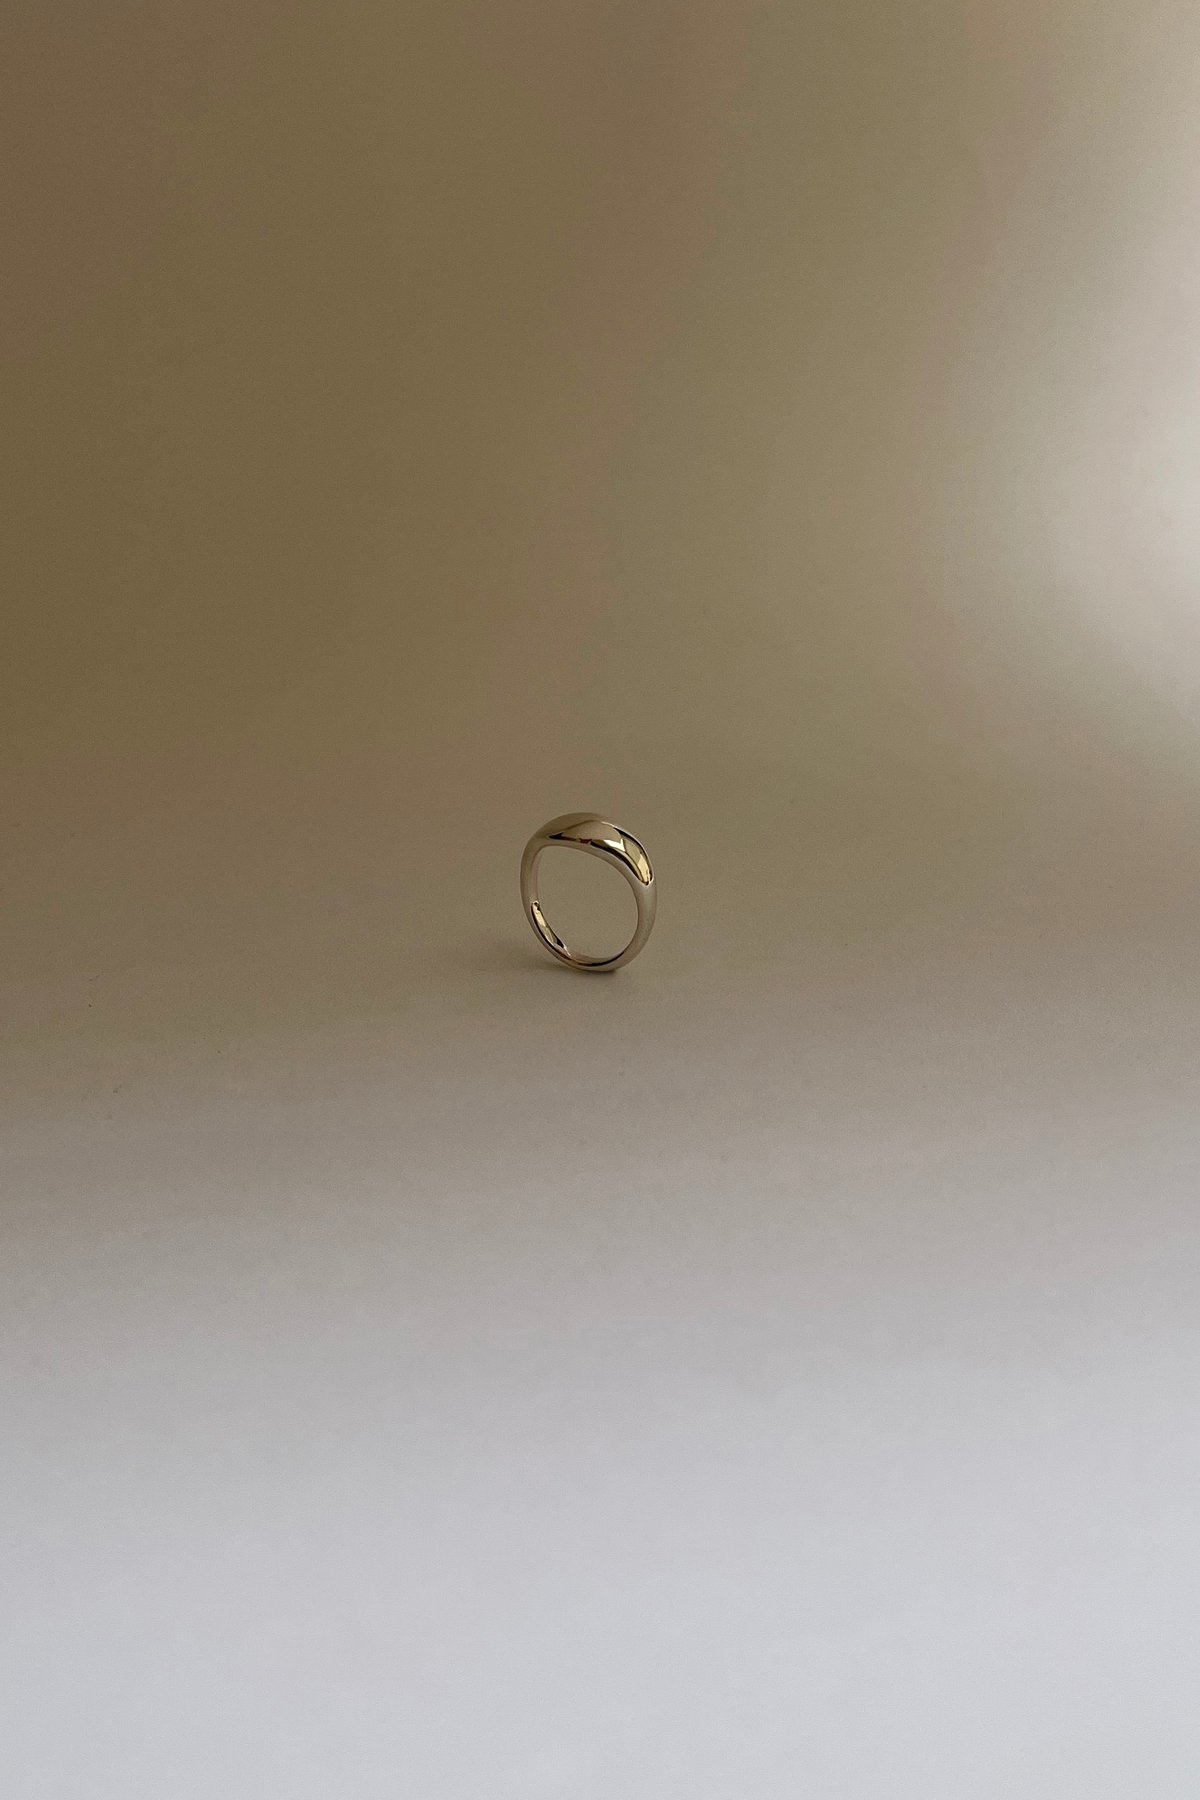 Image of Edition 4. Piece 11. Ring 